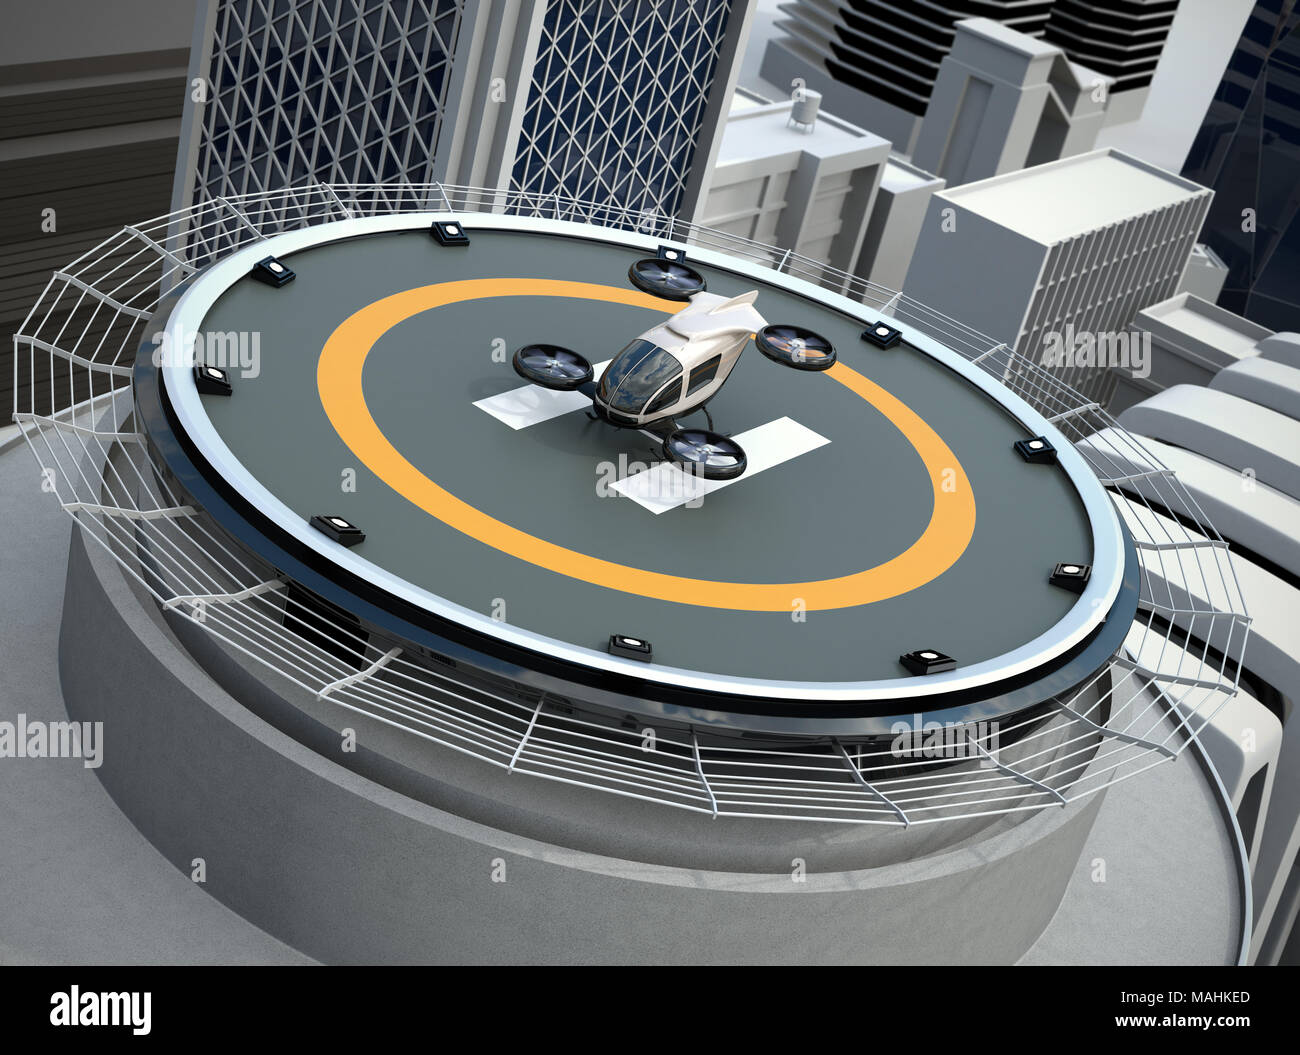 Hula hop Arthur Tangle White self-driving passenger drone takeoff and landing on the helipad. 3D  rendering image Stock Photo - Alamy